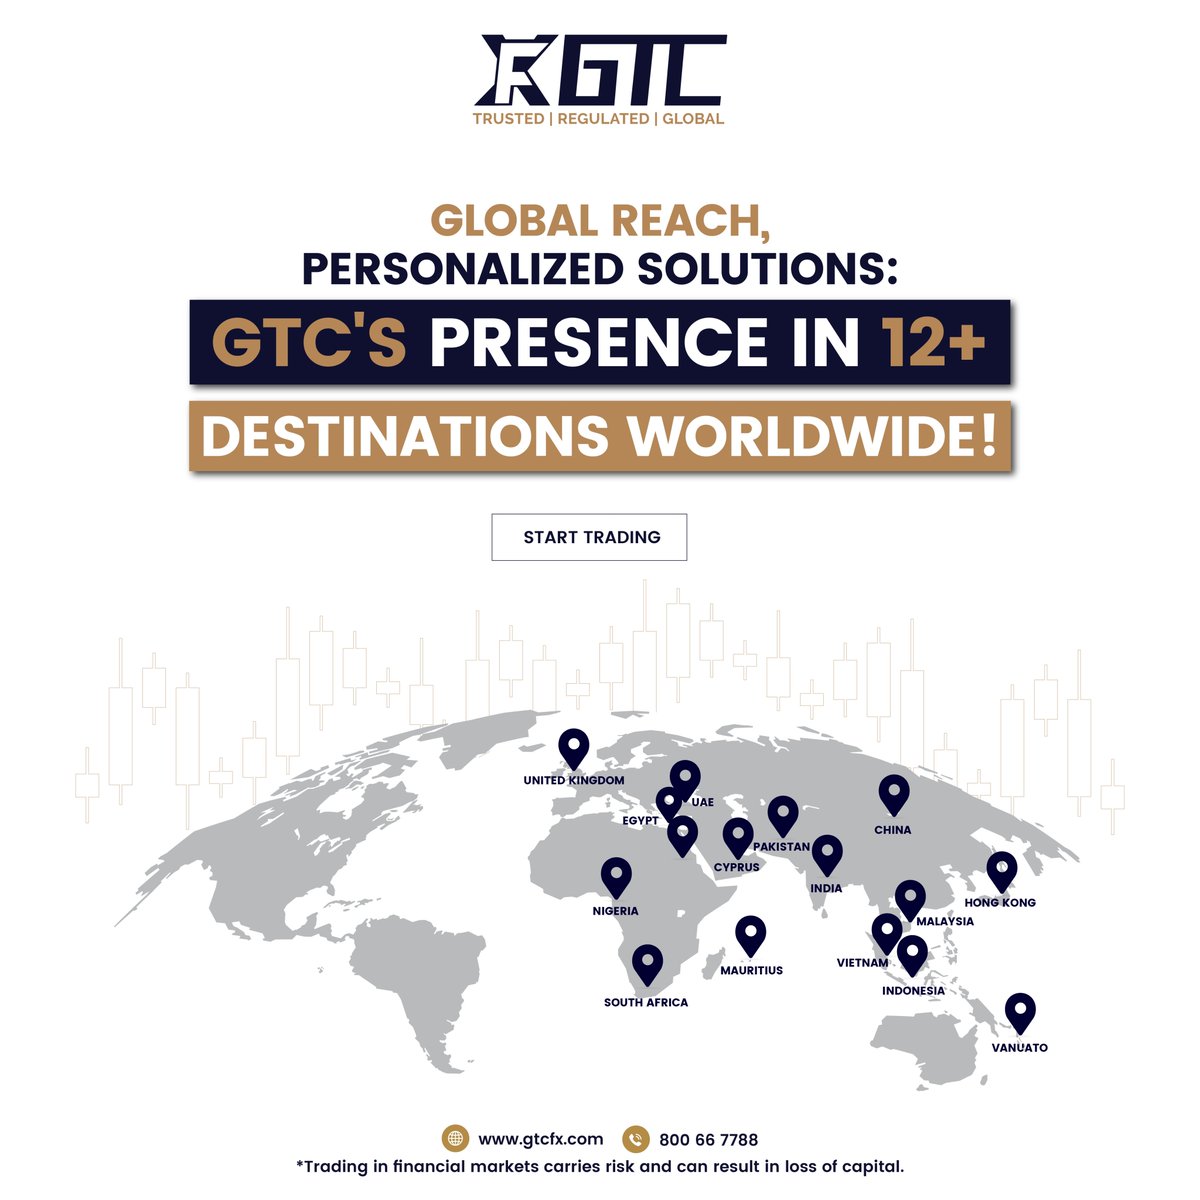 Discover the power of global reach with personalized solutions! 🌍✨ GTC's presence in 12+ destinations worldwide ensure you get tailored support wherever you trade. Start your trading journey today with us
#GTCGroup #GTCFX #GlobalTrading #PersonalizedSolutions #Global #Countries